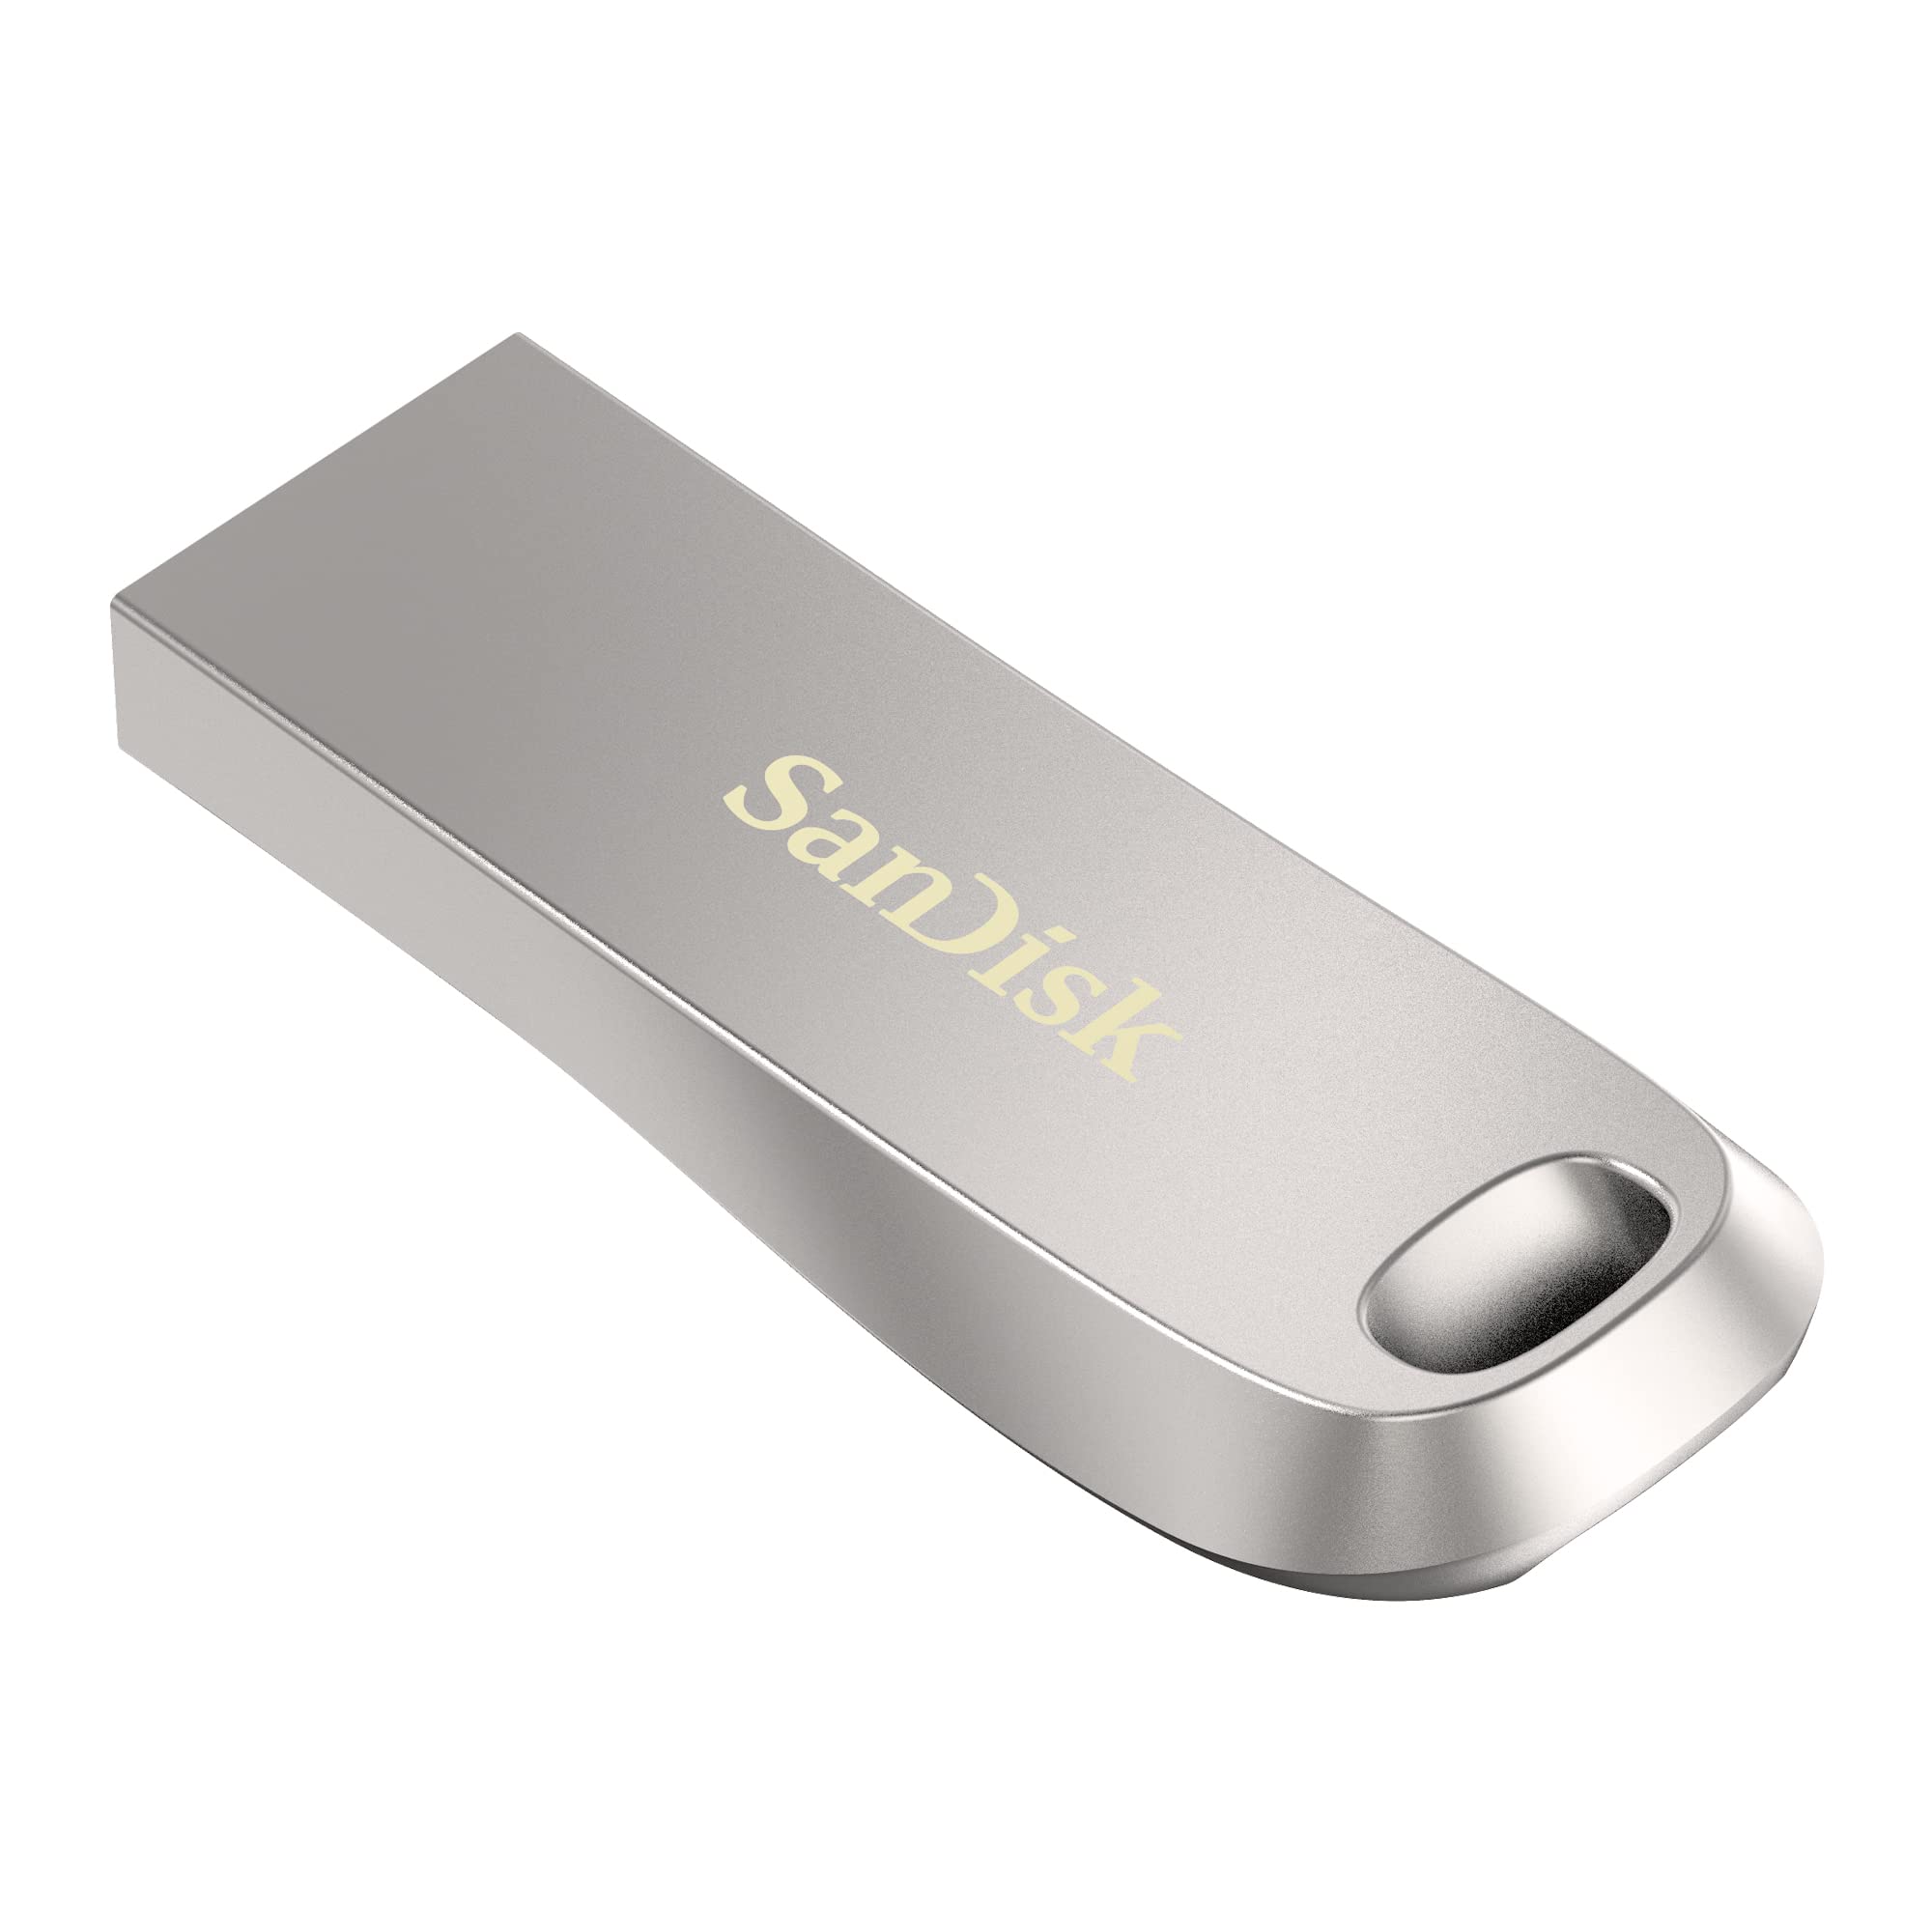 SanDisk Ultra Luxe 256 GB USB Flash Drive USB 3.1 up to 150 MB/s, Silver